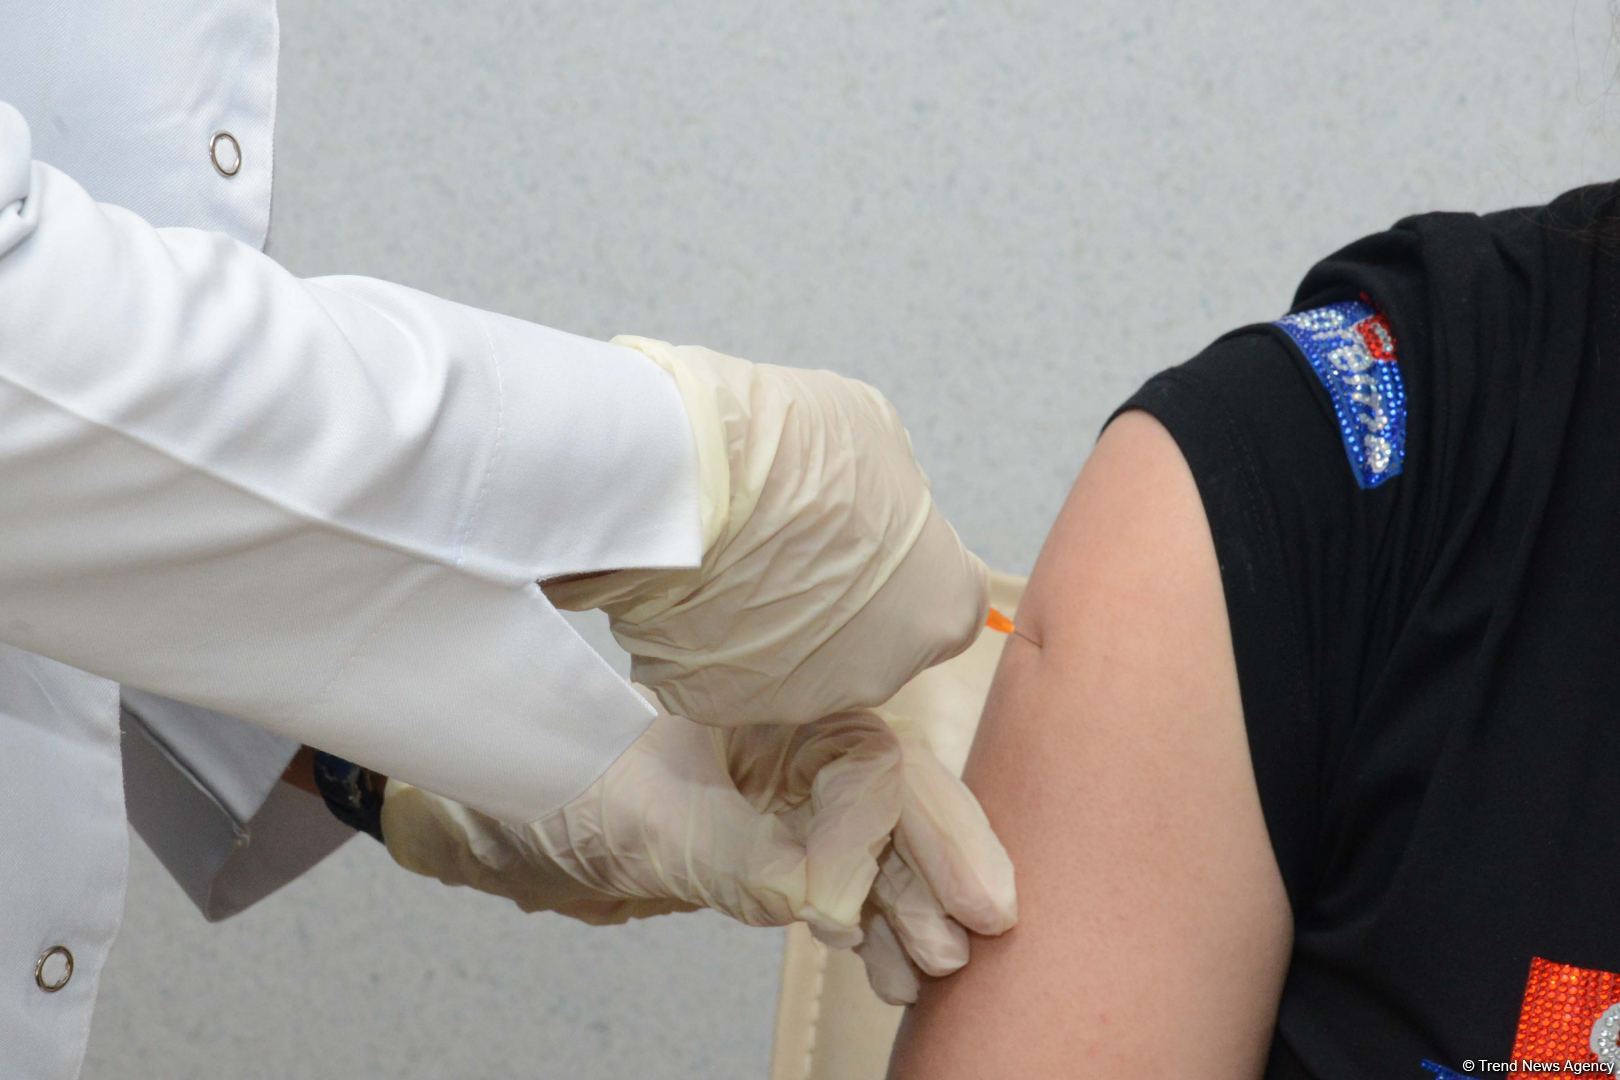 Azerbaijan announces number of citizens vaccinated on Aug. 10